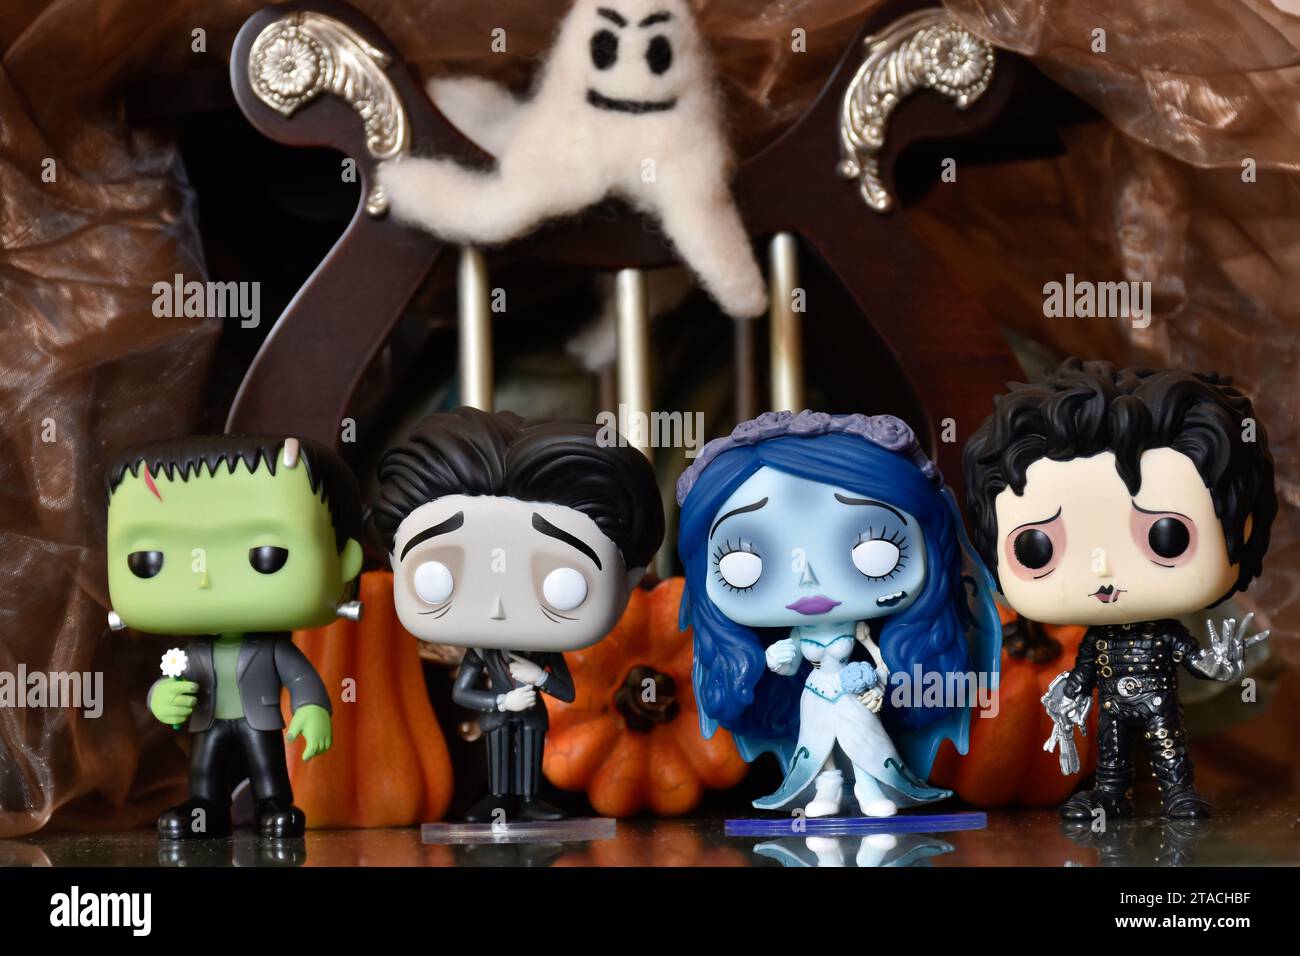 Funko Pop action figures of horror characters Frankenstein's monster, Edward Scissorhands, Emily and Victor from Corpse Bride. Halloween  decorations. Stock Photo